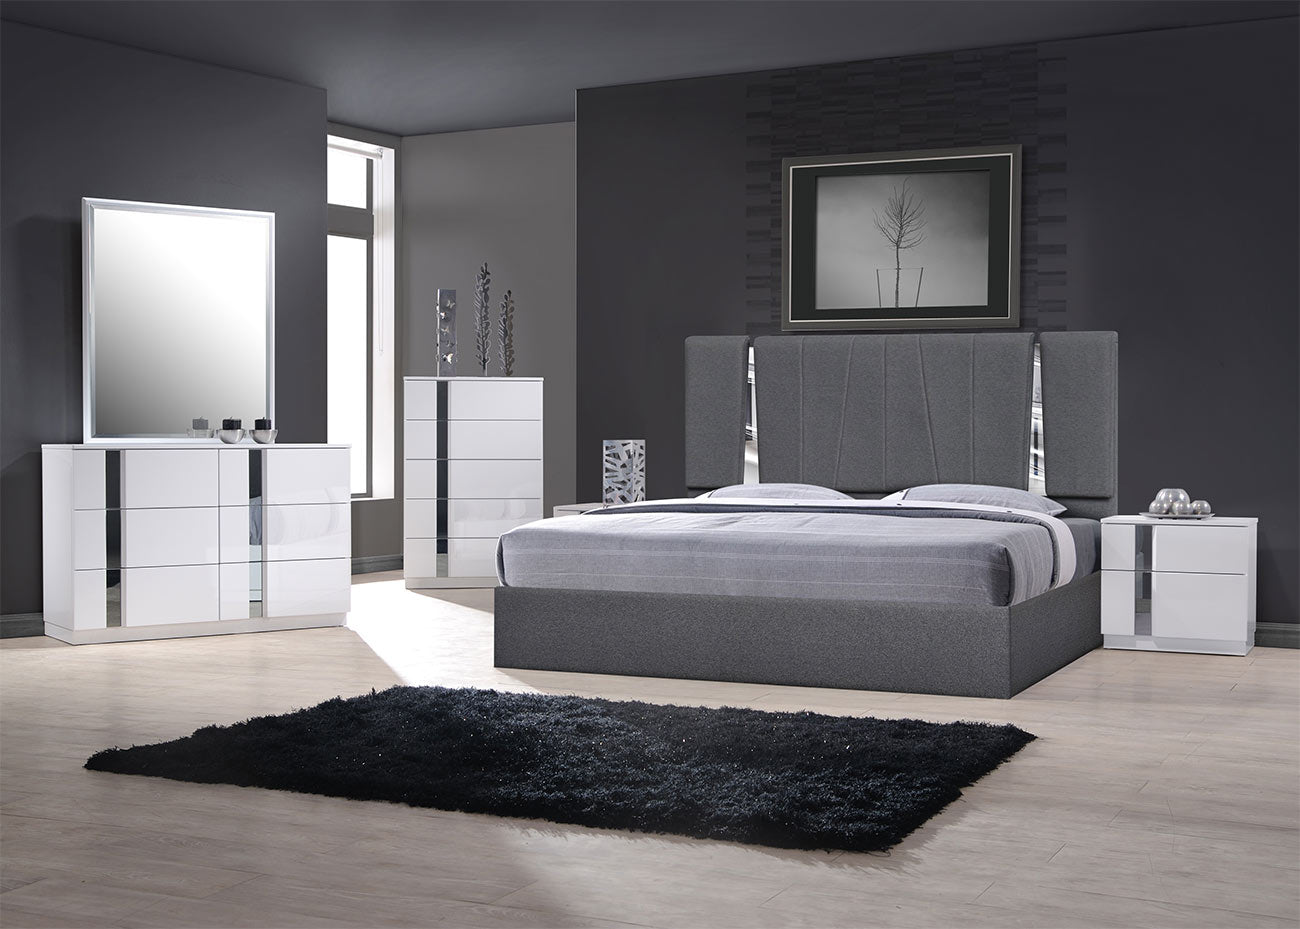 Matissee Bed in Charcoal